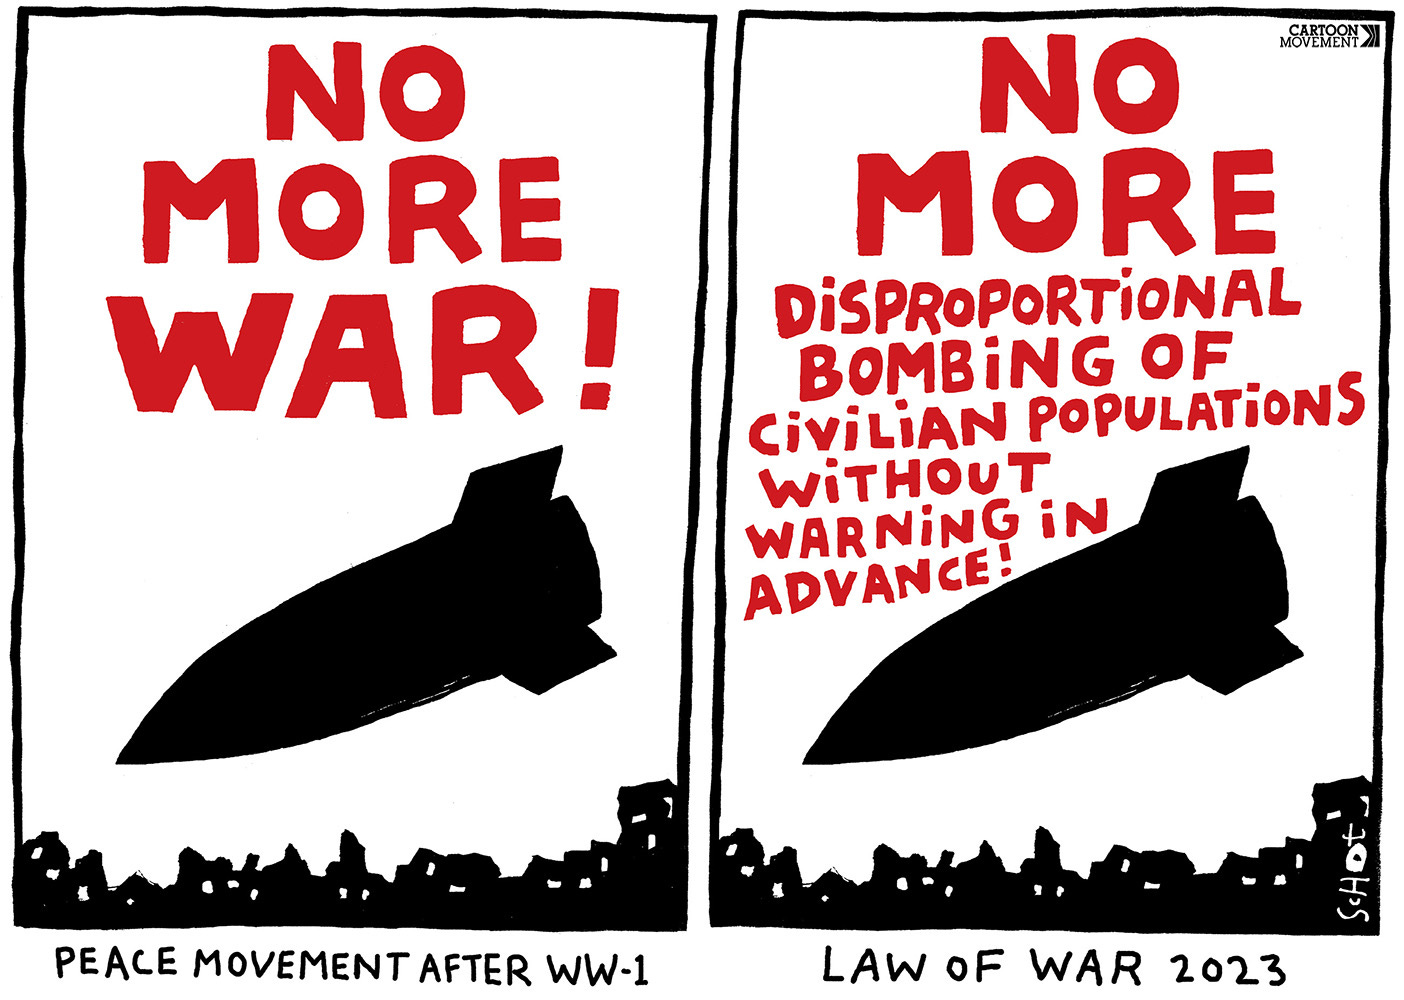 Two-panel cartoon: in the first panel, we see bomb falling with above it the text "No more war!". Below the panel is the caption "Peace movement after WW1". In the second panel, we see bomb falling with above it the text "No more disproportional bombing of civilian populations without warning in advance". Below the panel is the caption "law of war 2023".